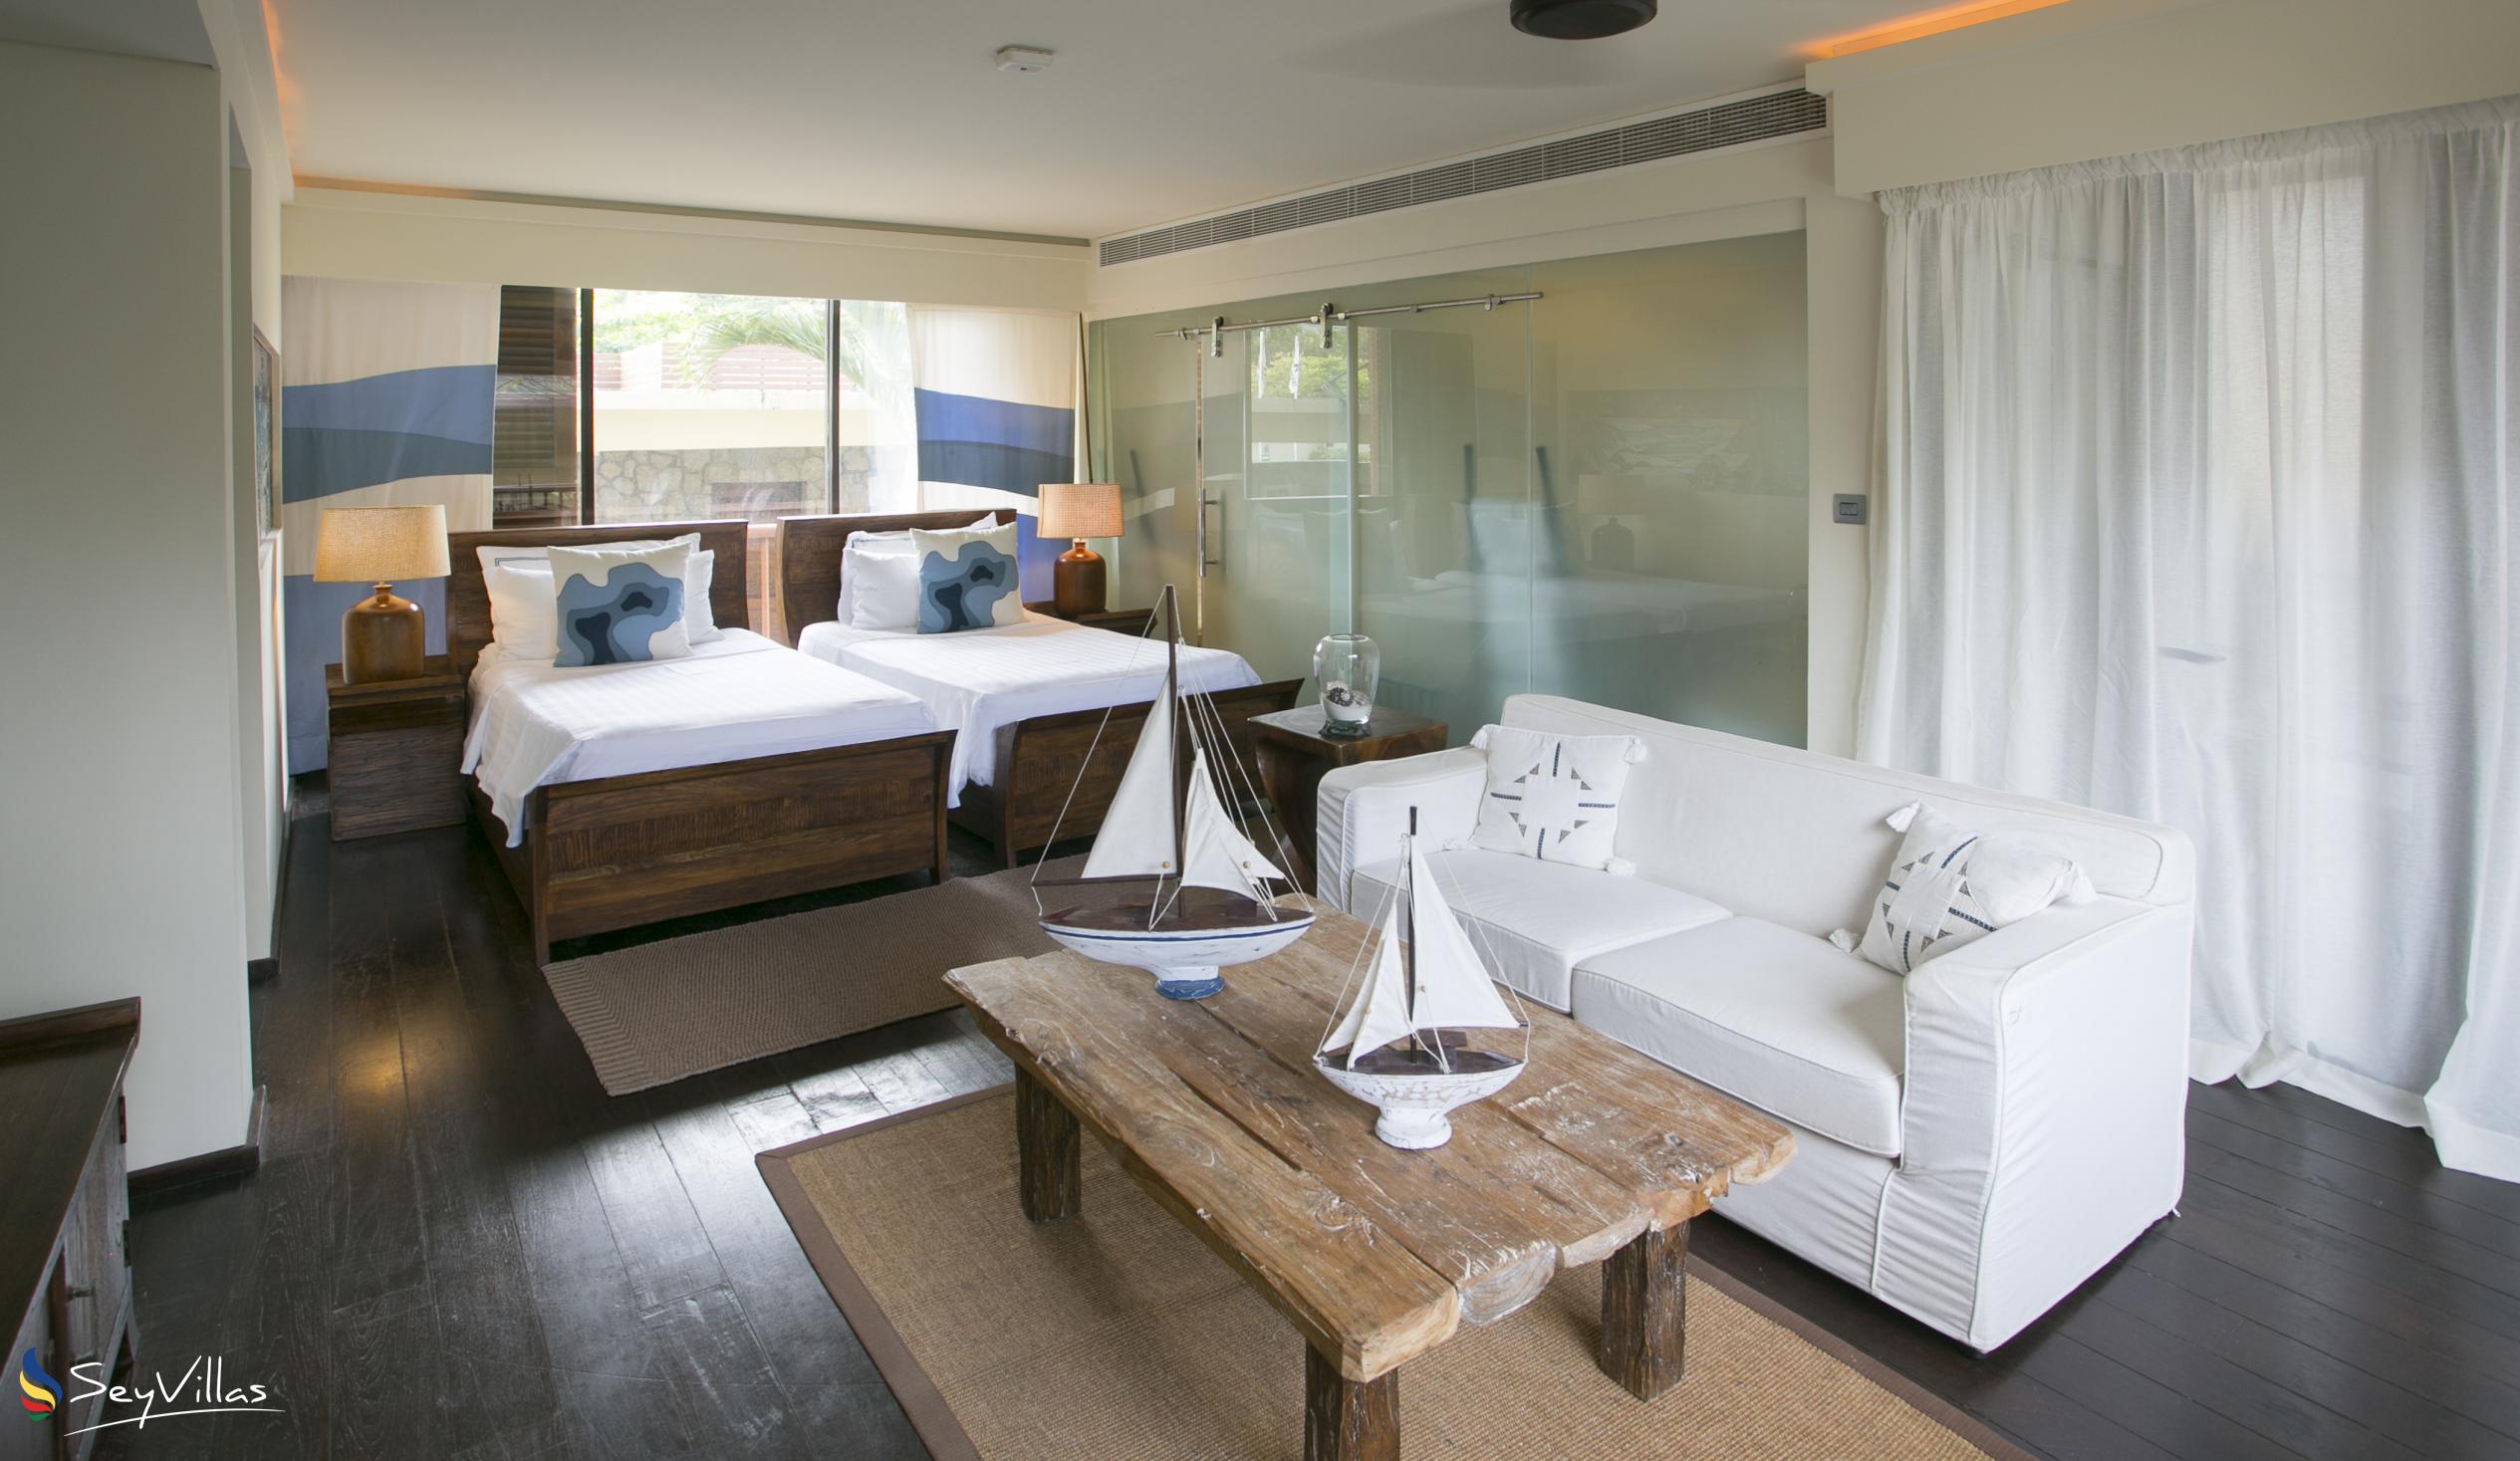 Photo 78: Dhevatara Beach Hotel - Classic Suite with Twin Bed - Praslin (Seychelles)